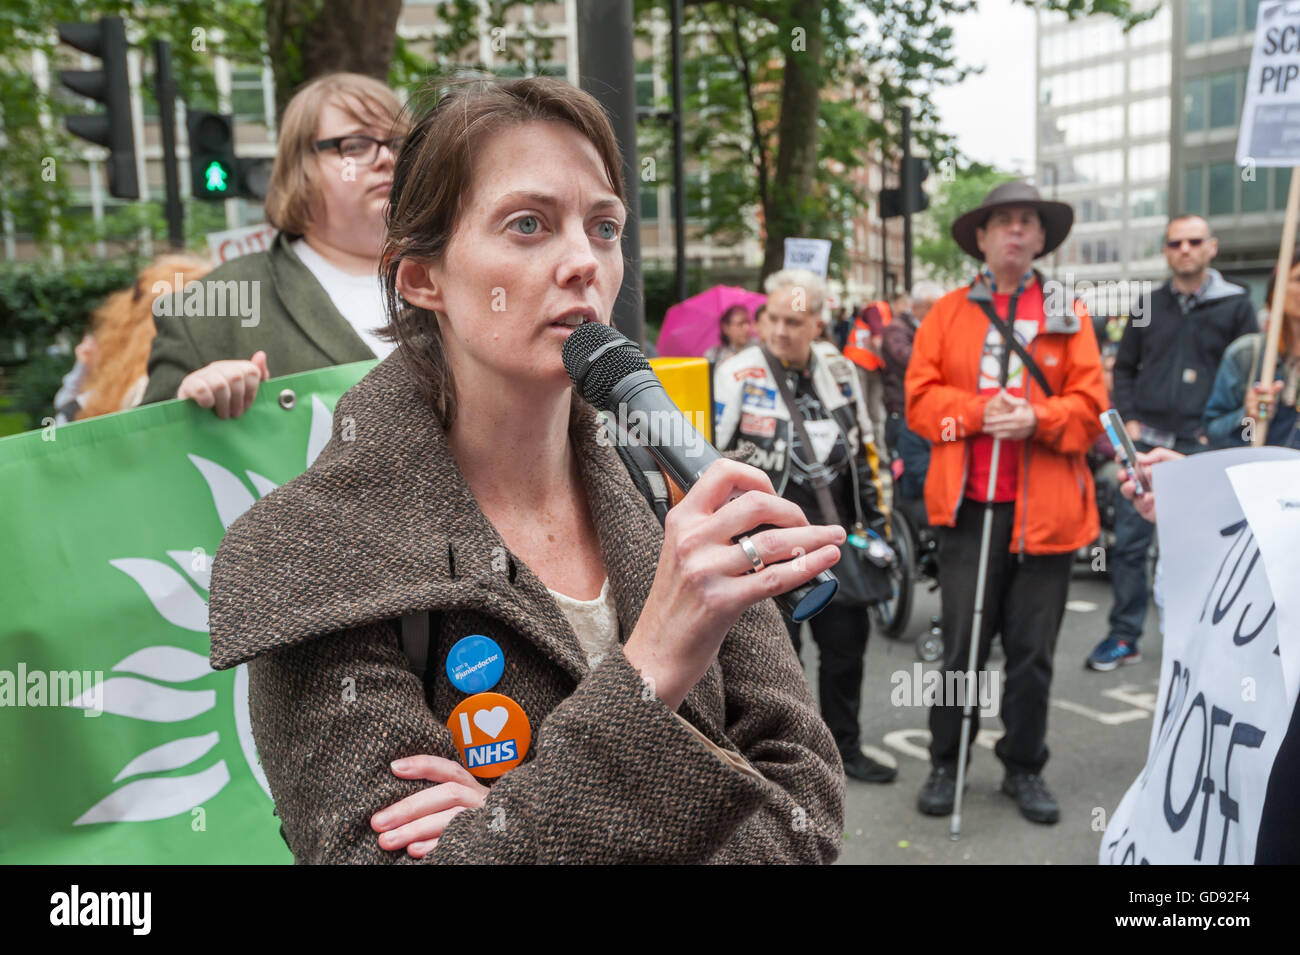 London, UK. 13 July 2016. Junior doctor Aislinn Macklin-Doherty speaks on Victoria St, which is blocked by disabled protesters outside the offices of Capita PLC over the removal of vital support which enables them to work and live on more even terms. The change from Disabled Living Allowance (DLA) to Personal Independence Payment (PIP) and shoddy assessments by Capita and Atos, many of which are overturned at tribunals months later, has led to many losing essential support. Peter Marshall/Alamy Live News Stock Photo